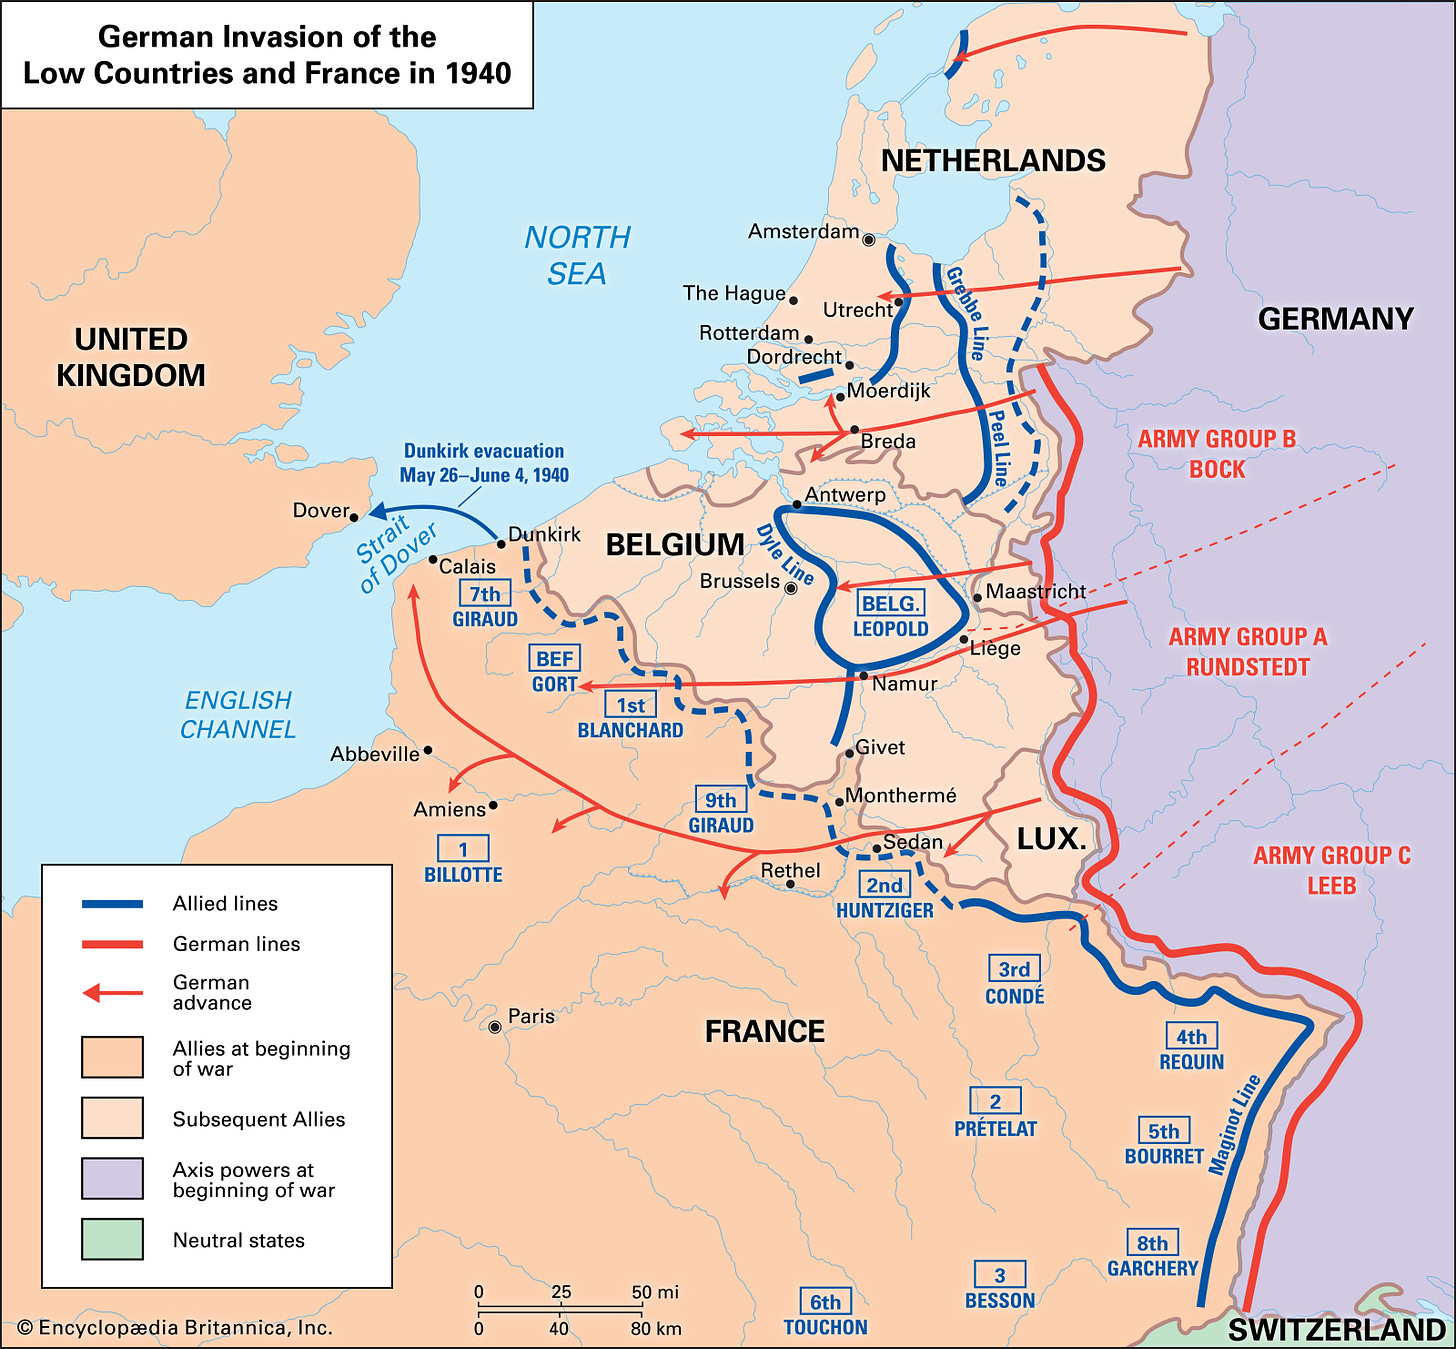 Battle of France - The invasion of the Low Countries | Britannica